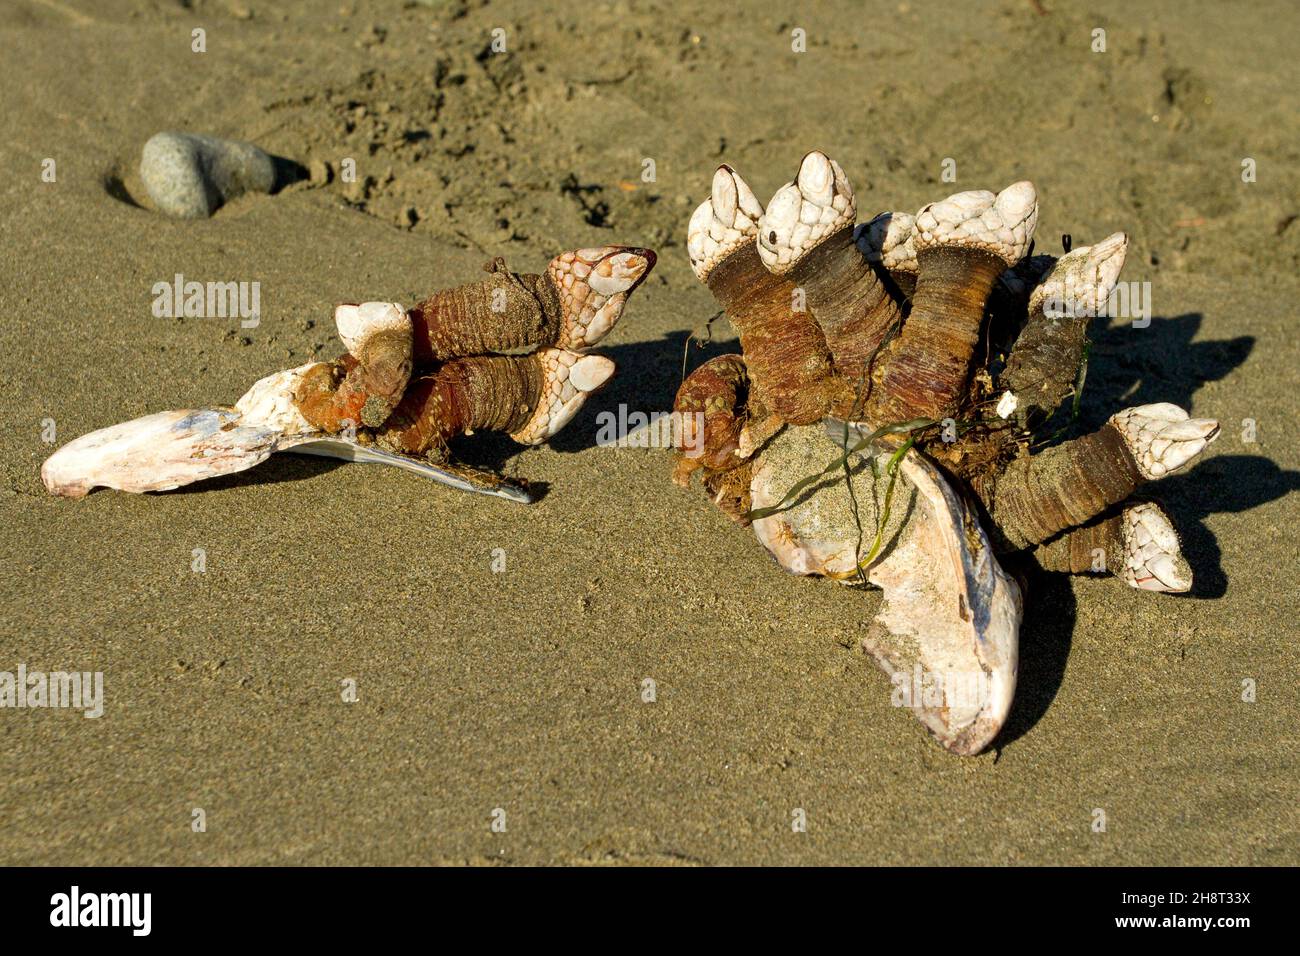 Gooseneck barnacles attached to shells on Wickaninnish beach, west coast Vancouver Island, BC, Canada in October Stock Photo